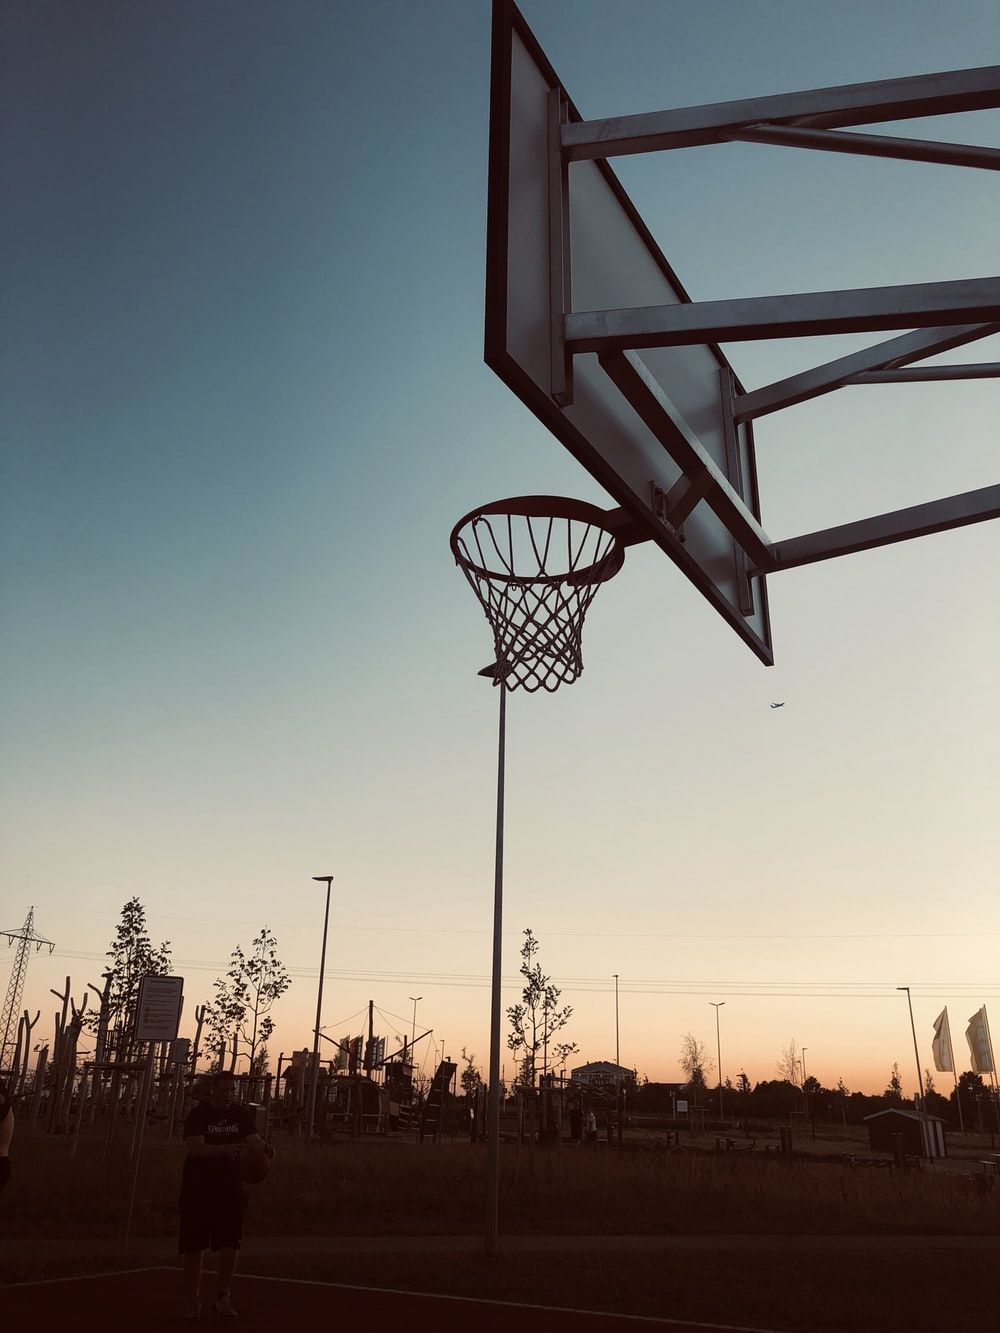 Basketball Goal Picture. Download Free Image